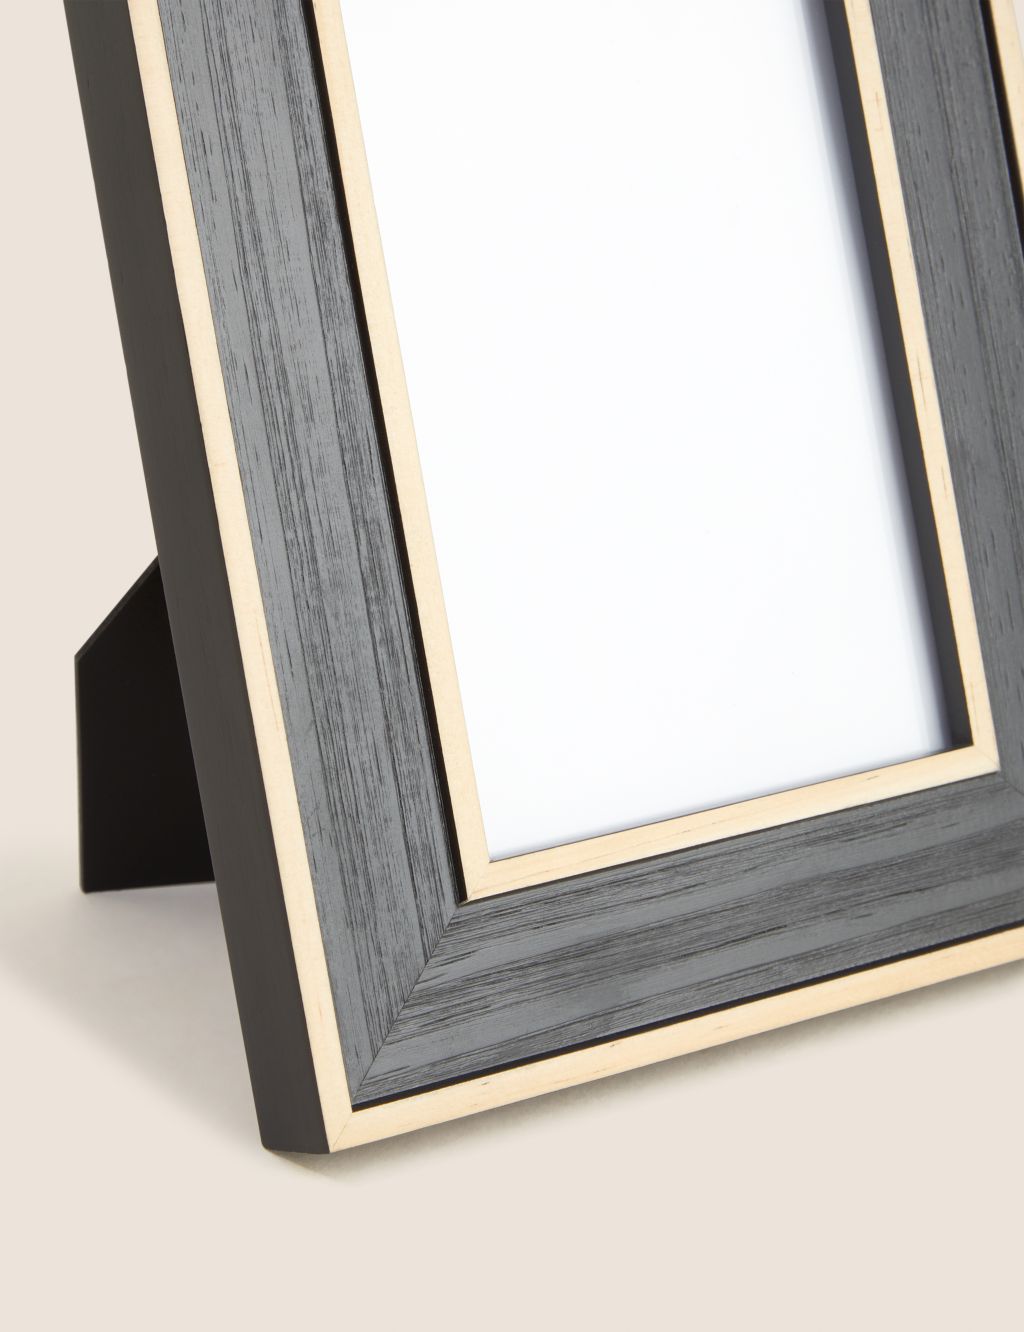 Two Tone Wood Photo Frame 4x6 inch image 2